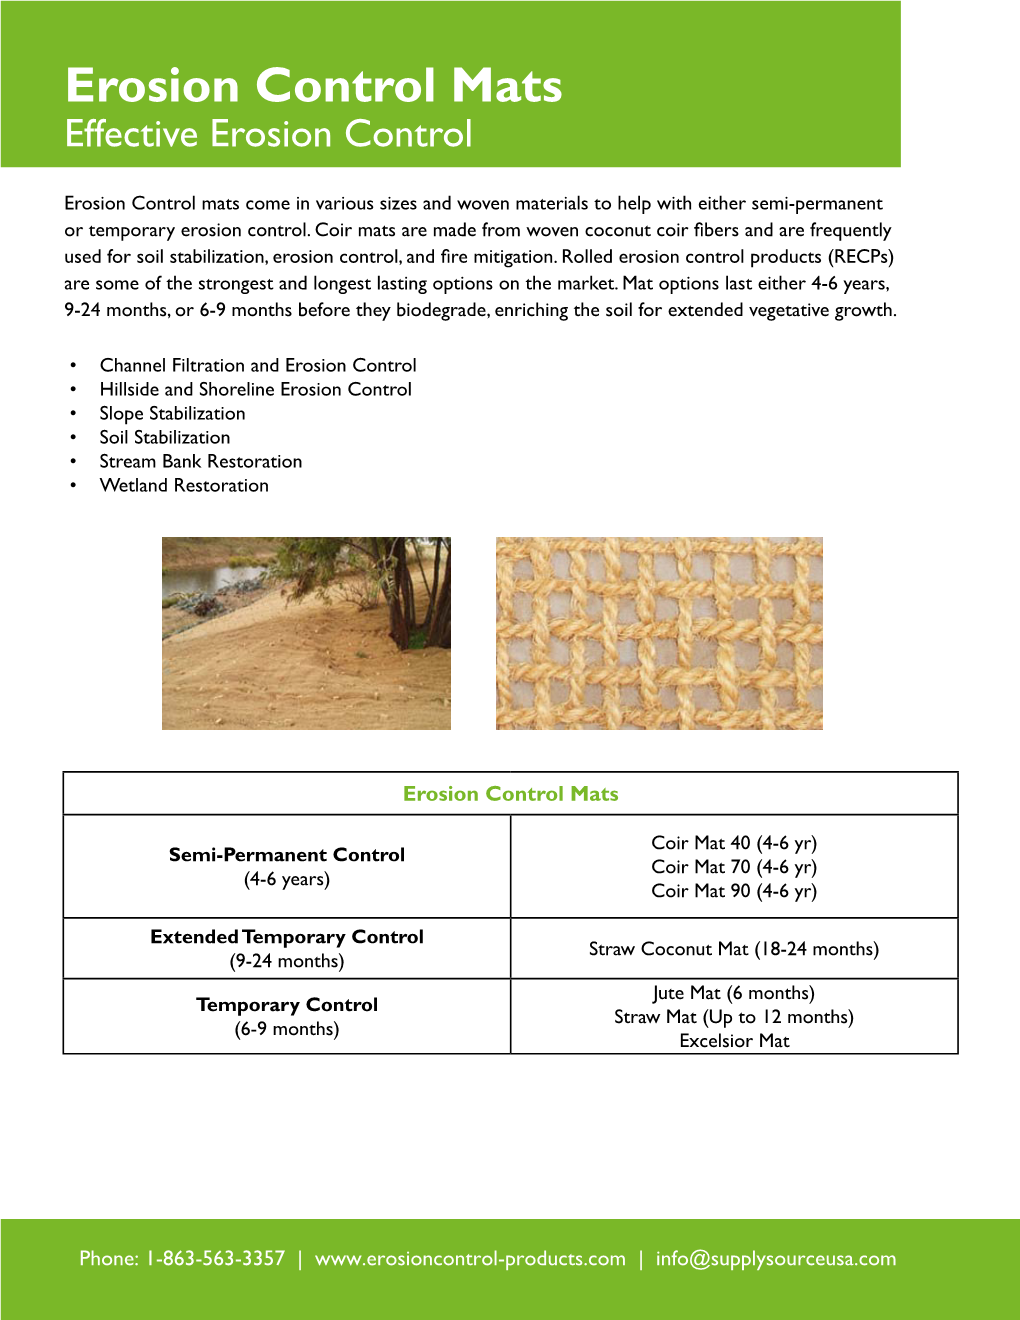 Coir Mats Are Made from Woven Coconut Coir Fibers and Are Frequently Used for Soil Stabilization, Erosion Control, and Fire Mitigation